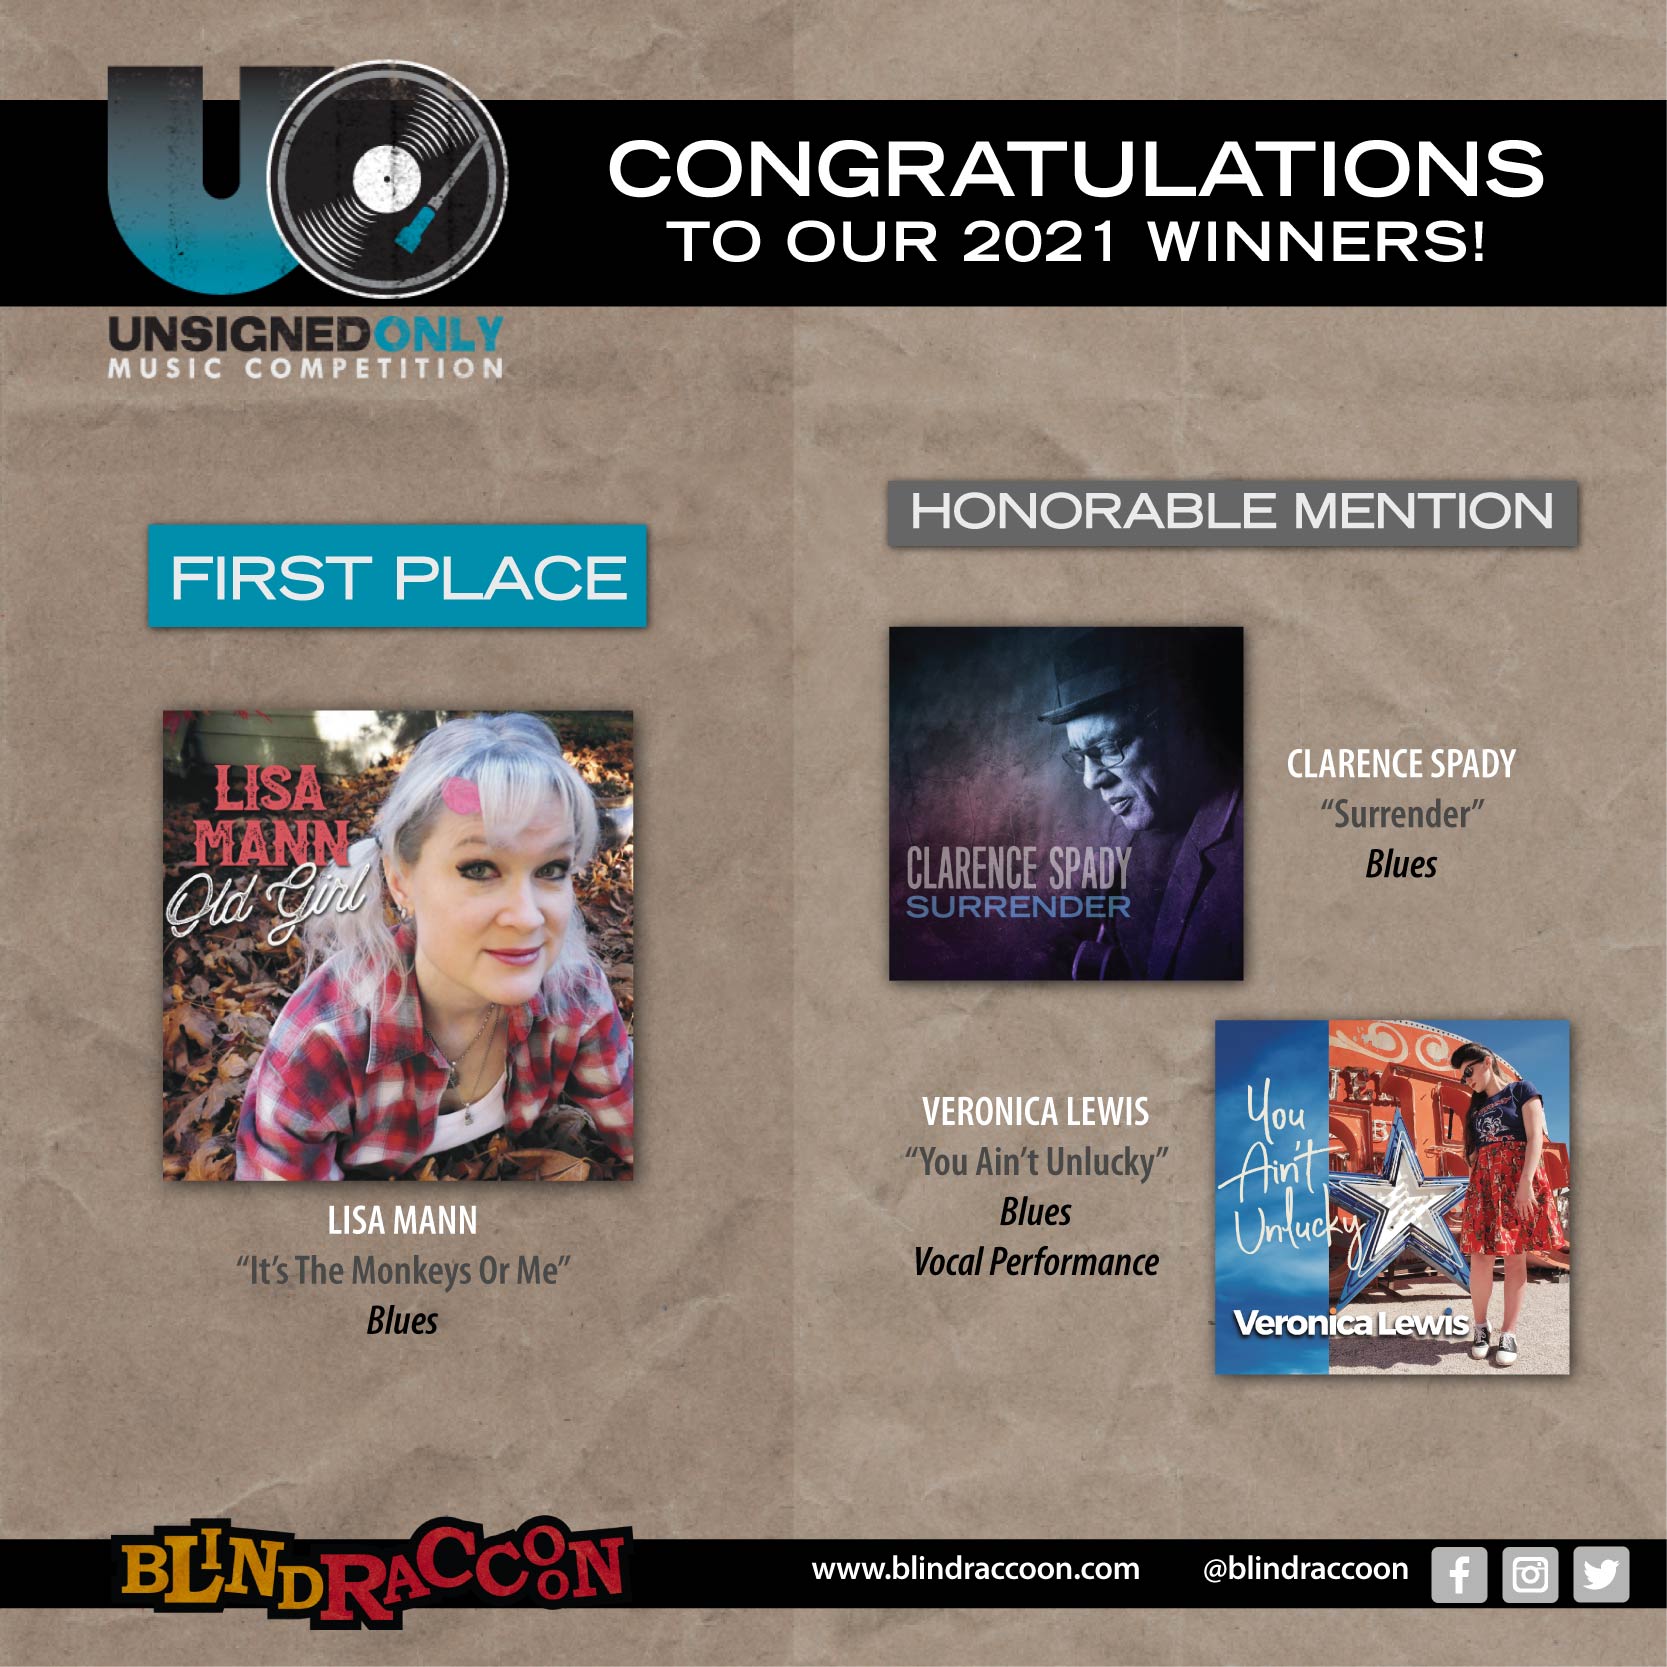 Blind Raccoon PR congratulates 2021 Unsigned Only song competition winners, including Lisa Mann